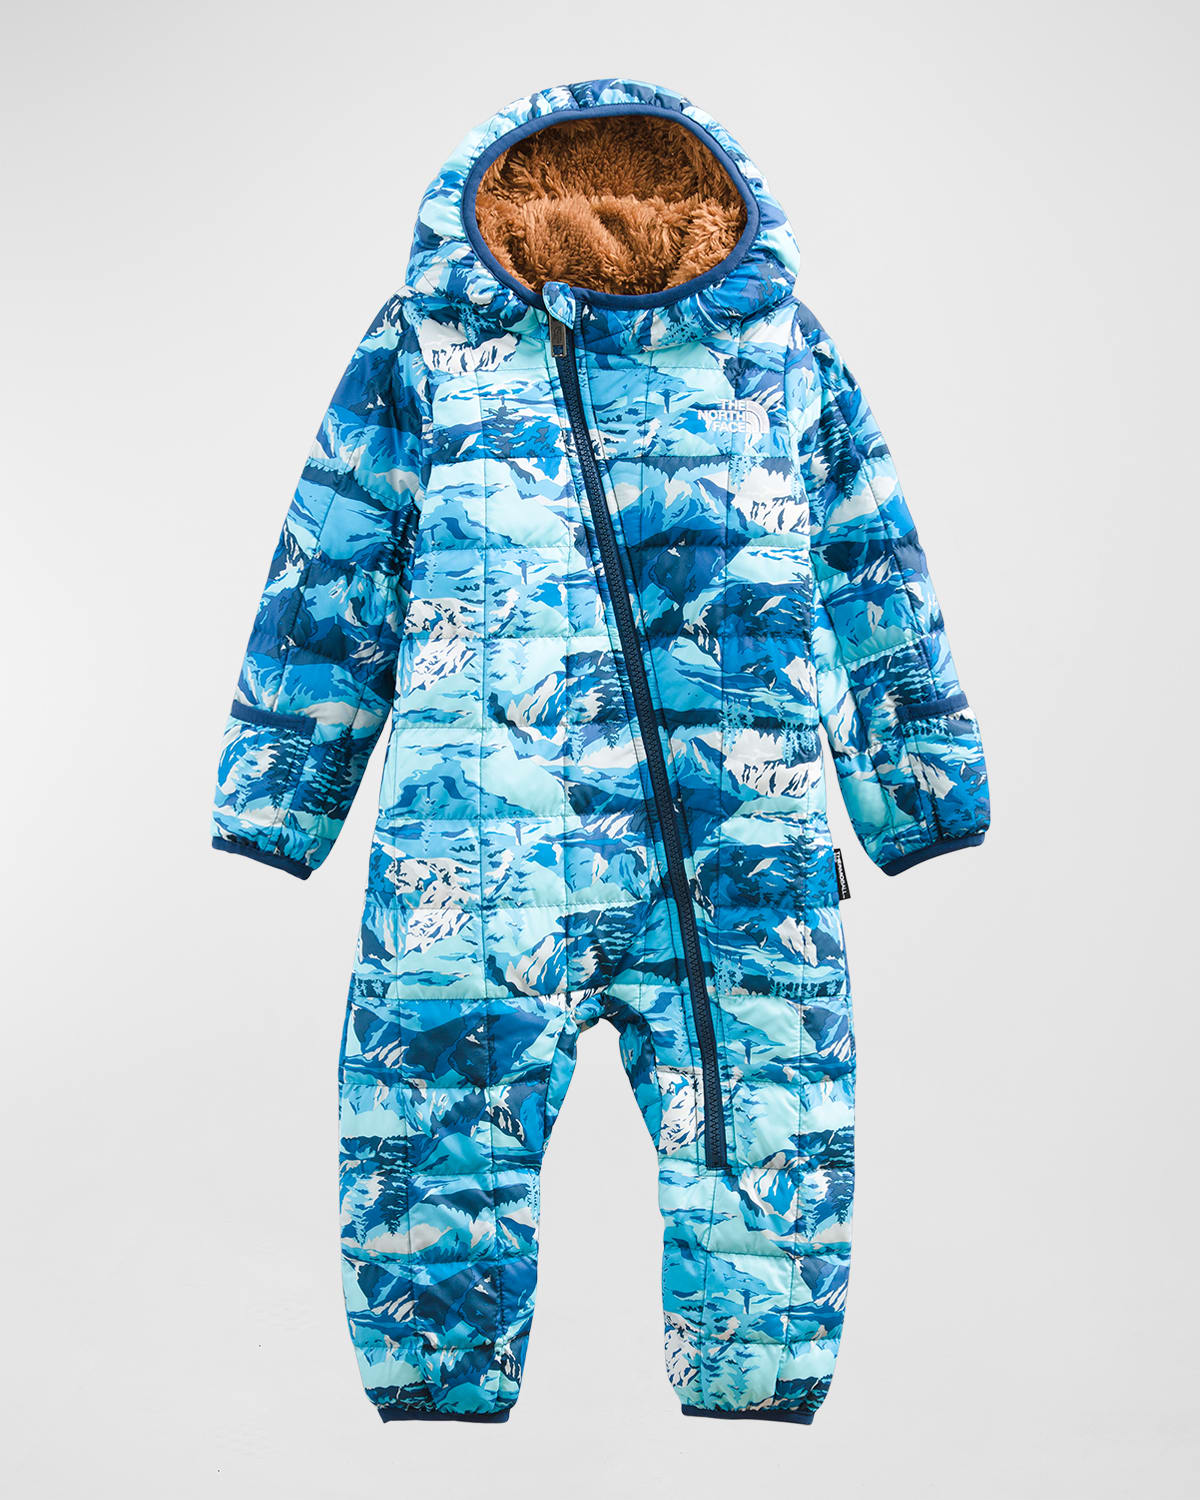 Boy's Thermoball Fleece Lined Printed Coverall, Size 6M-24M